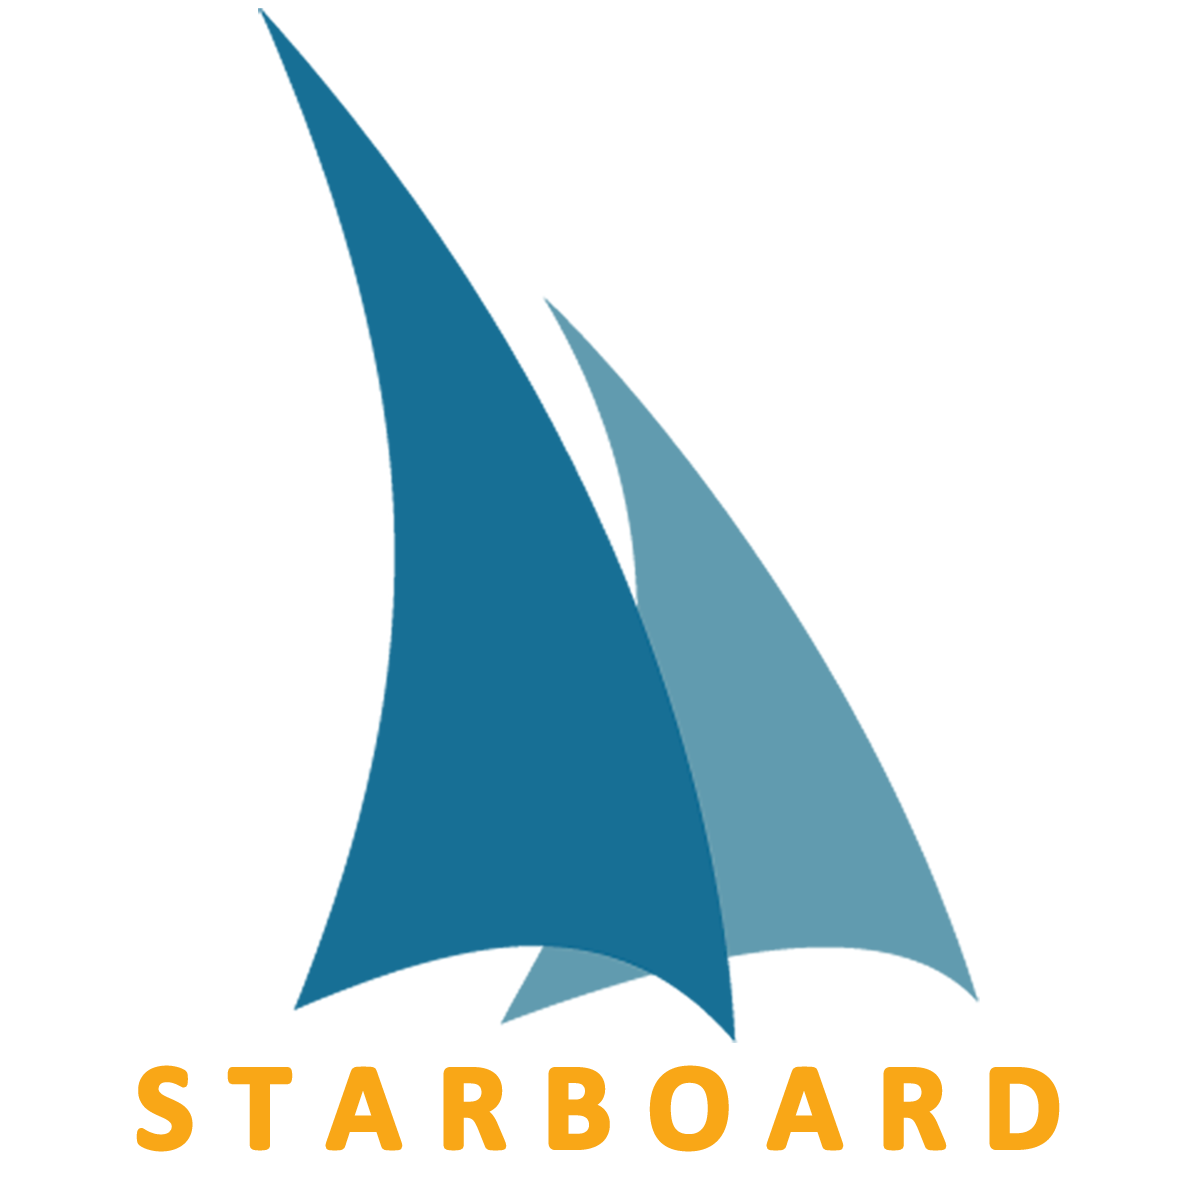 SGS-Maine Pointe and Starboard Solutions Corp. Partner to Help Customers Respond to Supply Chain Disruption